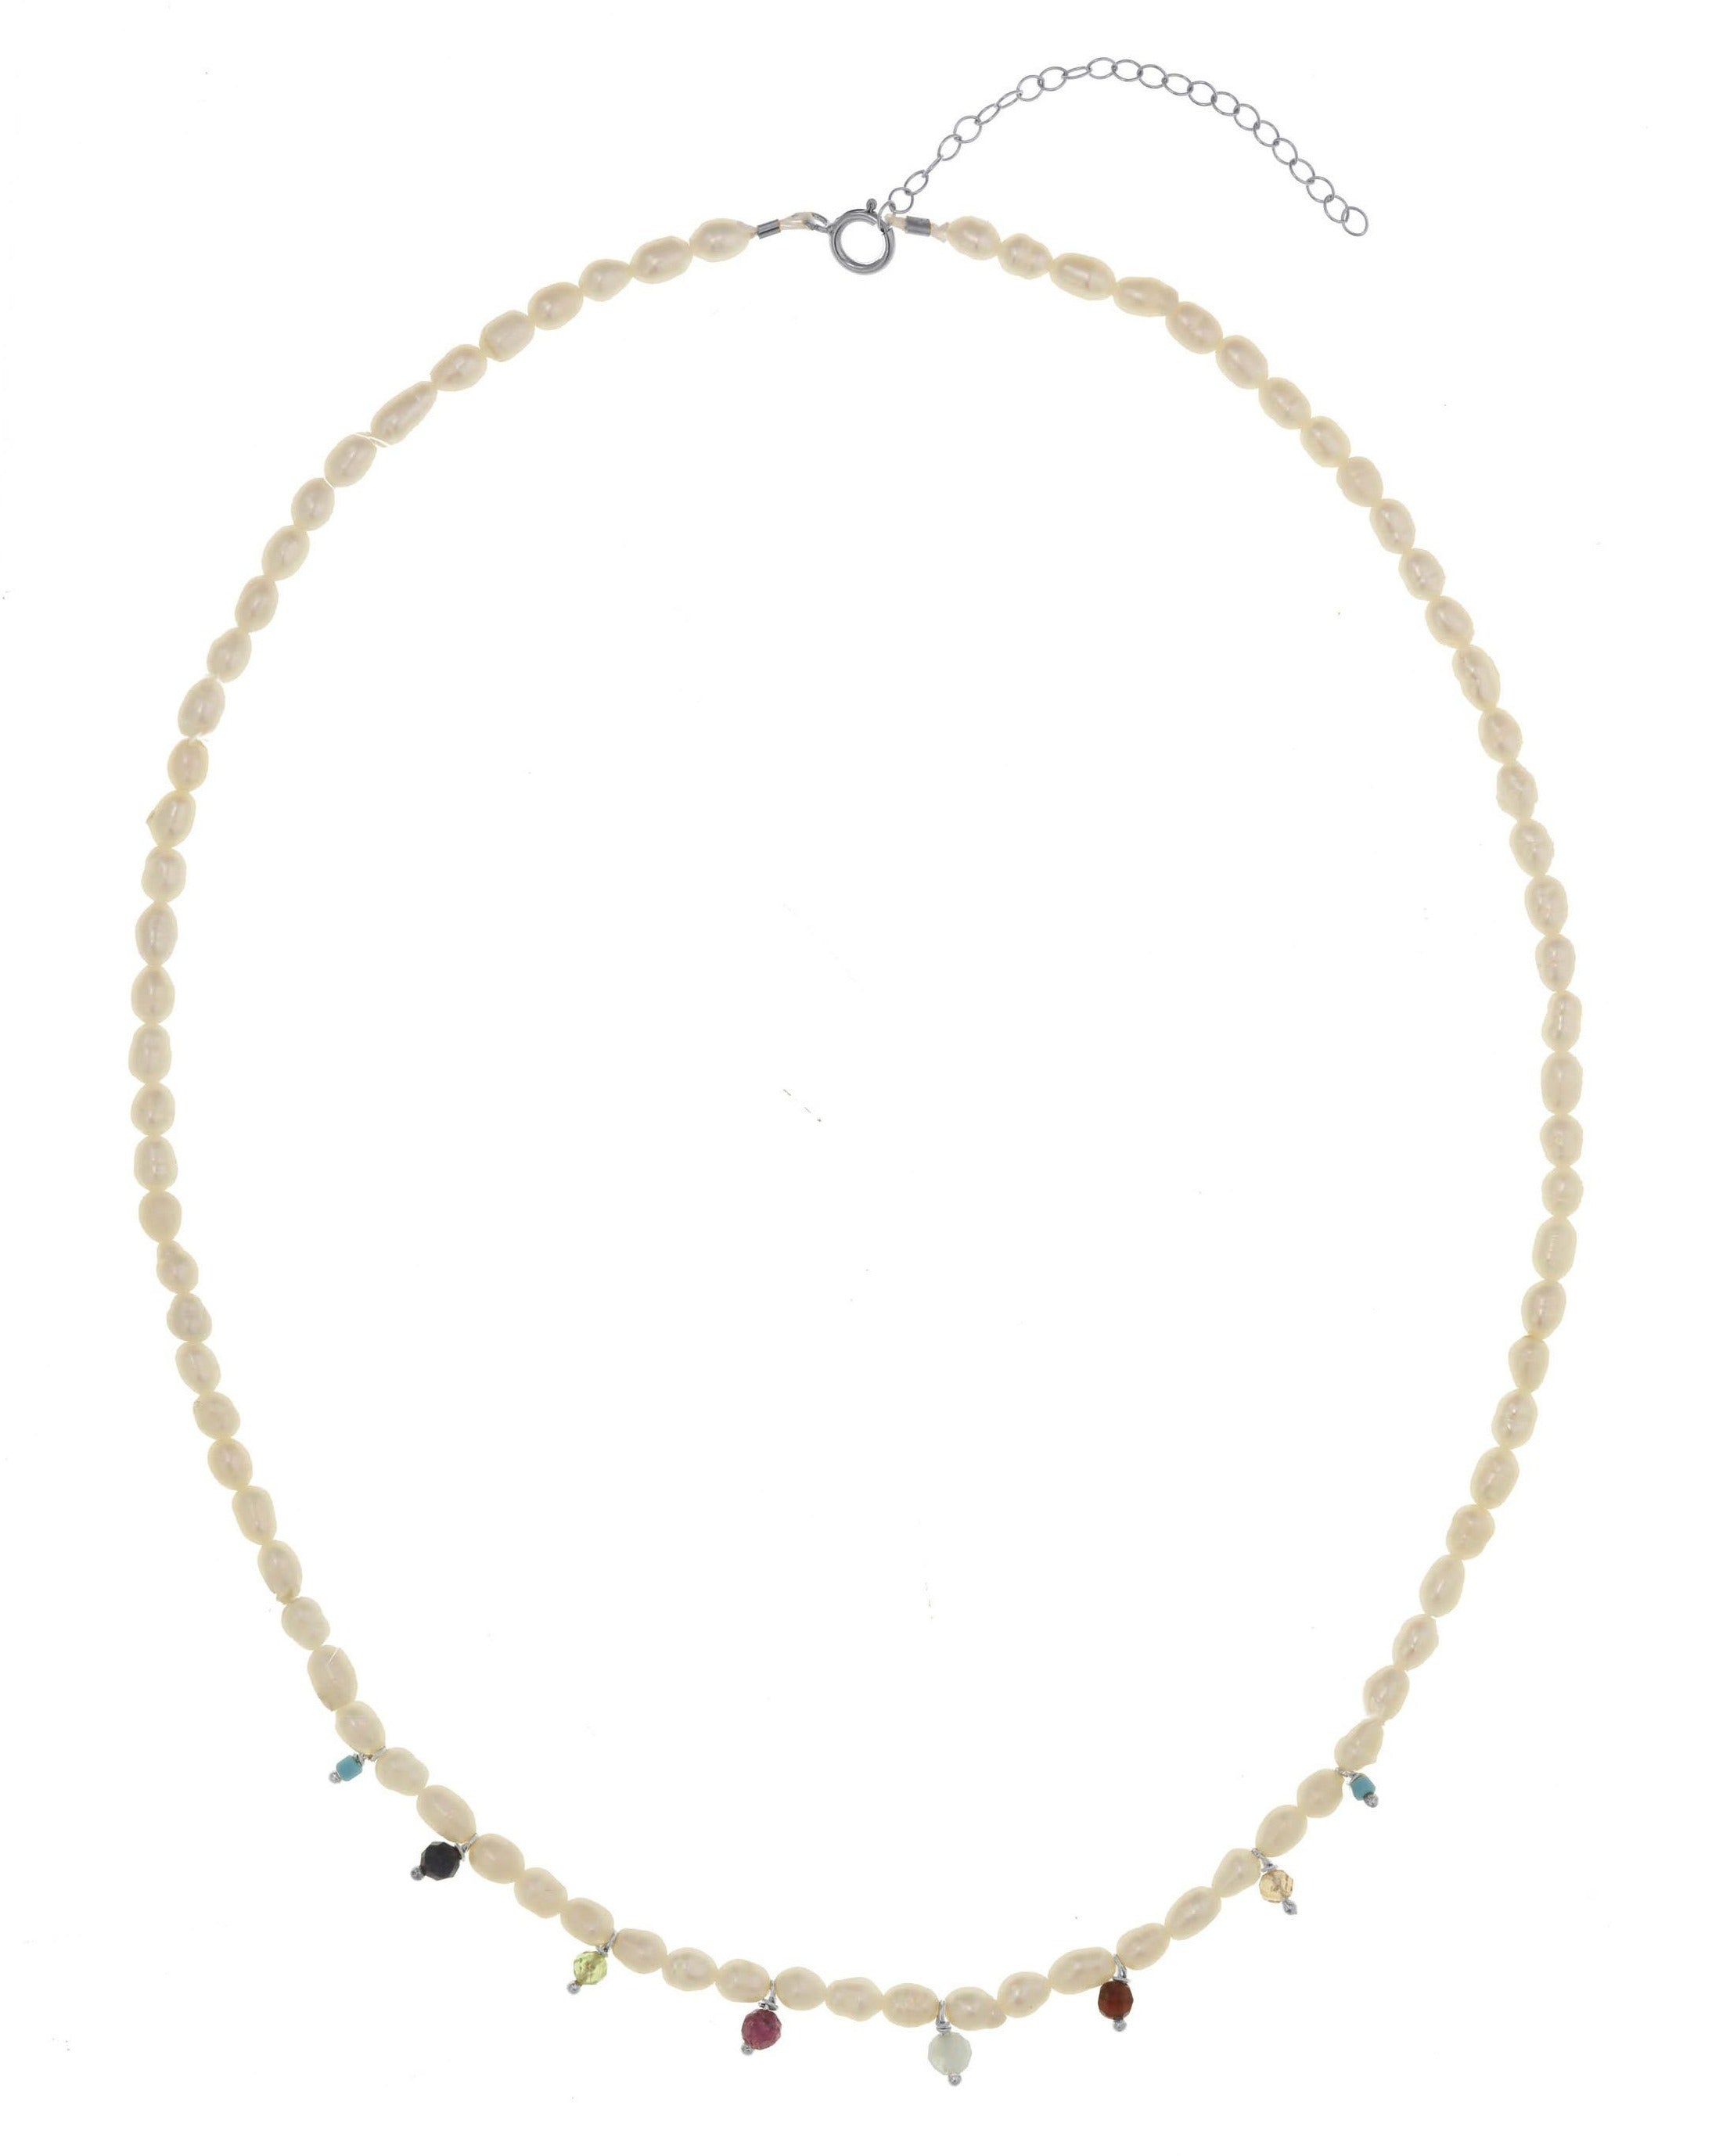 Zarina Necklace by KOZAKH. A 16 to 18 inch adjustable length, freshwater rice pearl strand necklace, clasp crafted in Sterling Silver, featuring Garnet, Peridot, Topaz, Aquamarine, Ruby, and Sapphire gemstones.